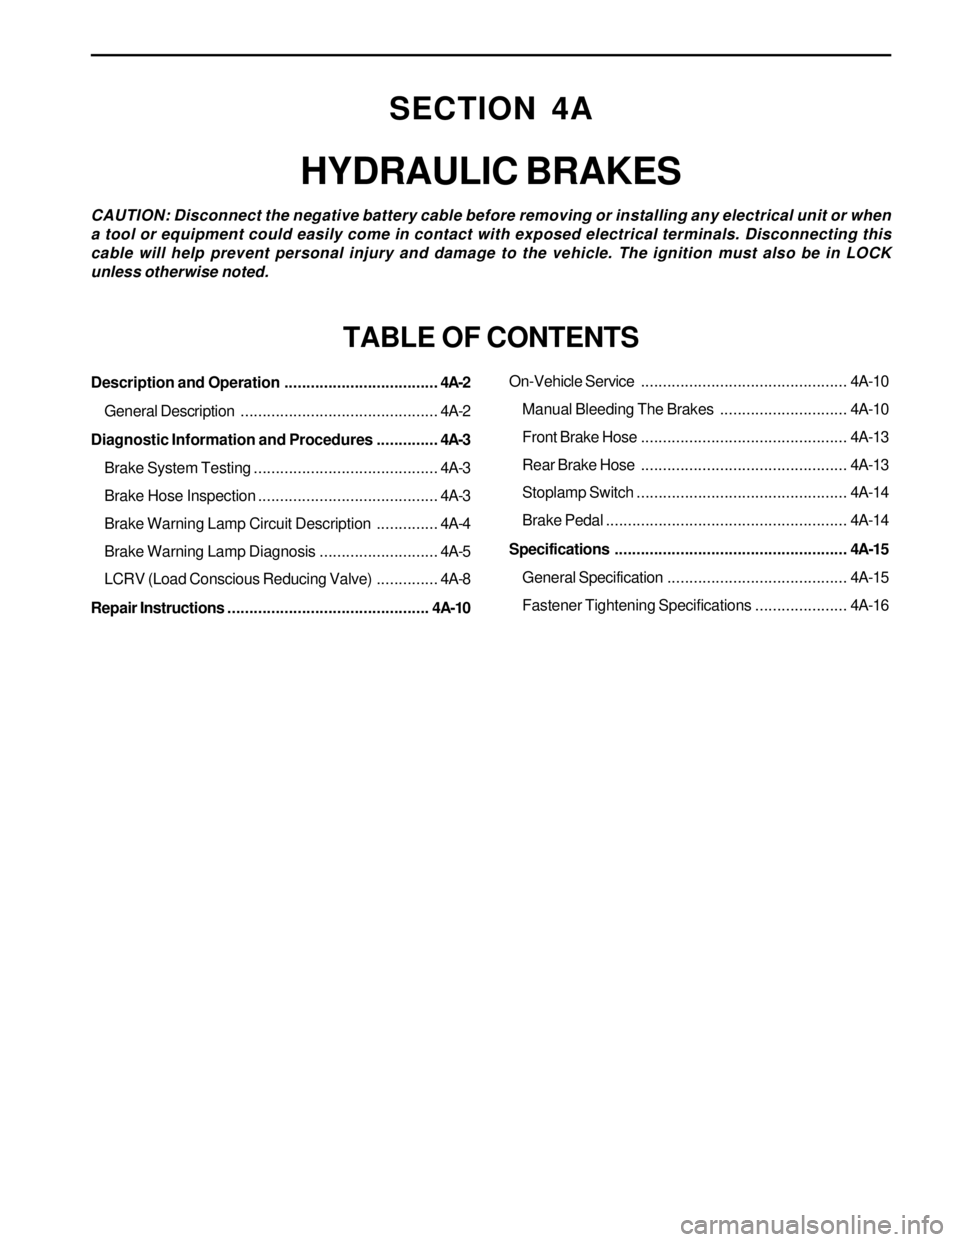 SSANGYONG KORANDO 1997  Service Repair Manual SECTION 4A
HYDRAULIC BRAKES
CAUTION: Disconnect the negative battery cable before removing or installing any electrical unit or when
a tool or equipment could easily come in contact with exposed elect